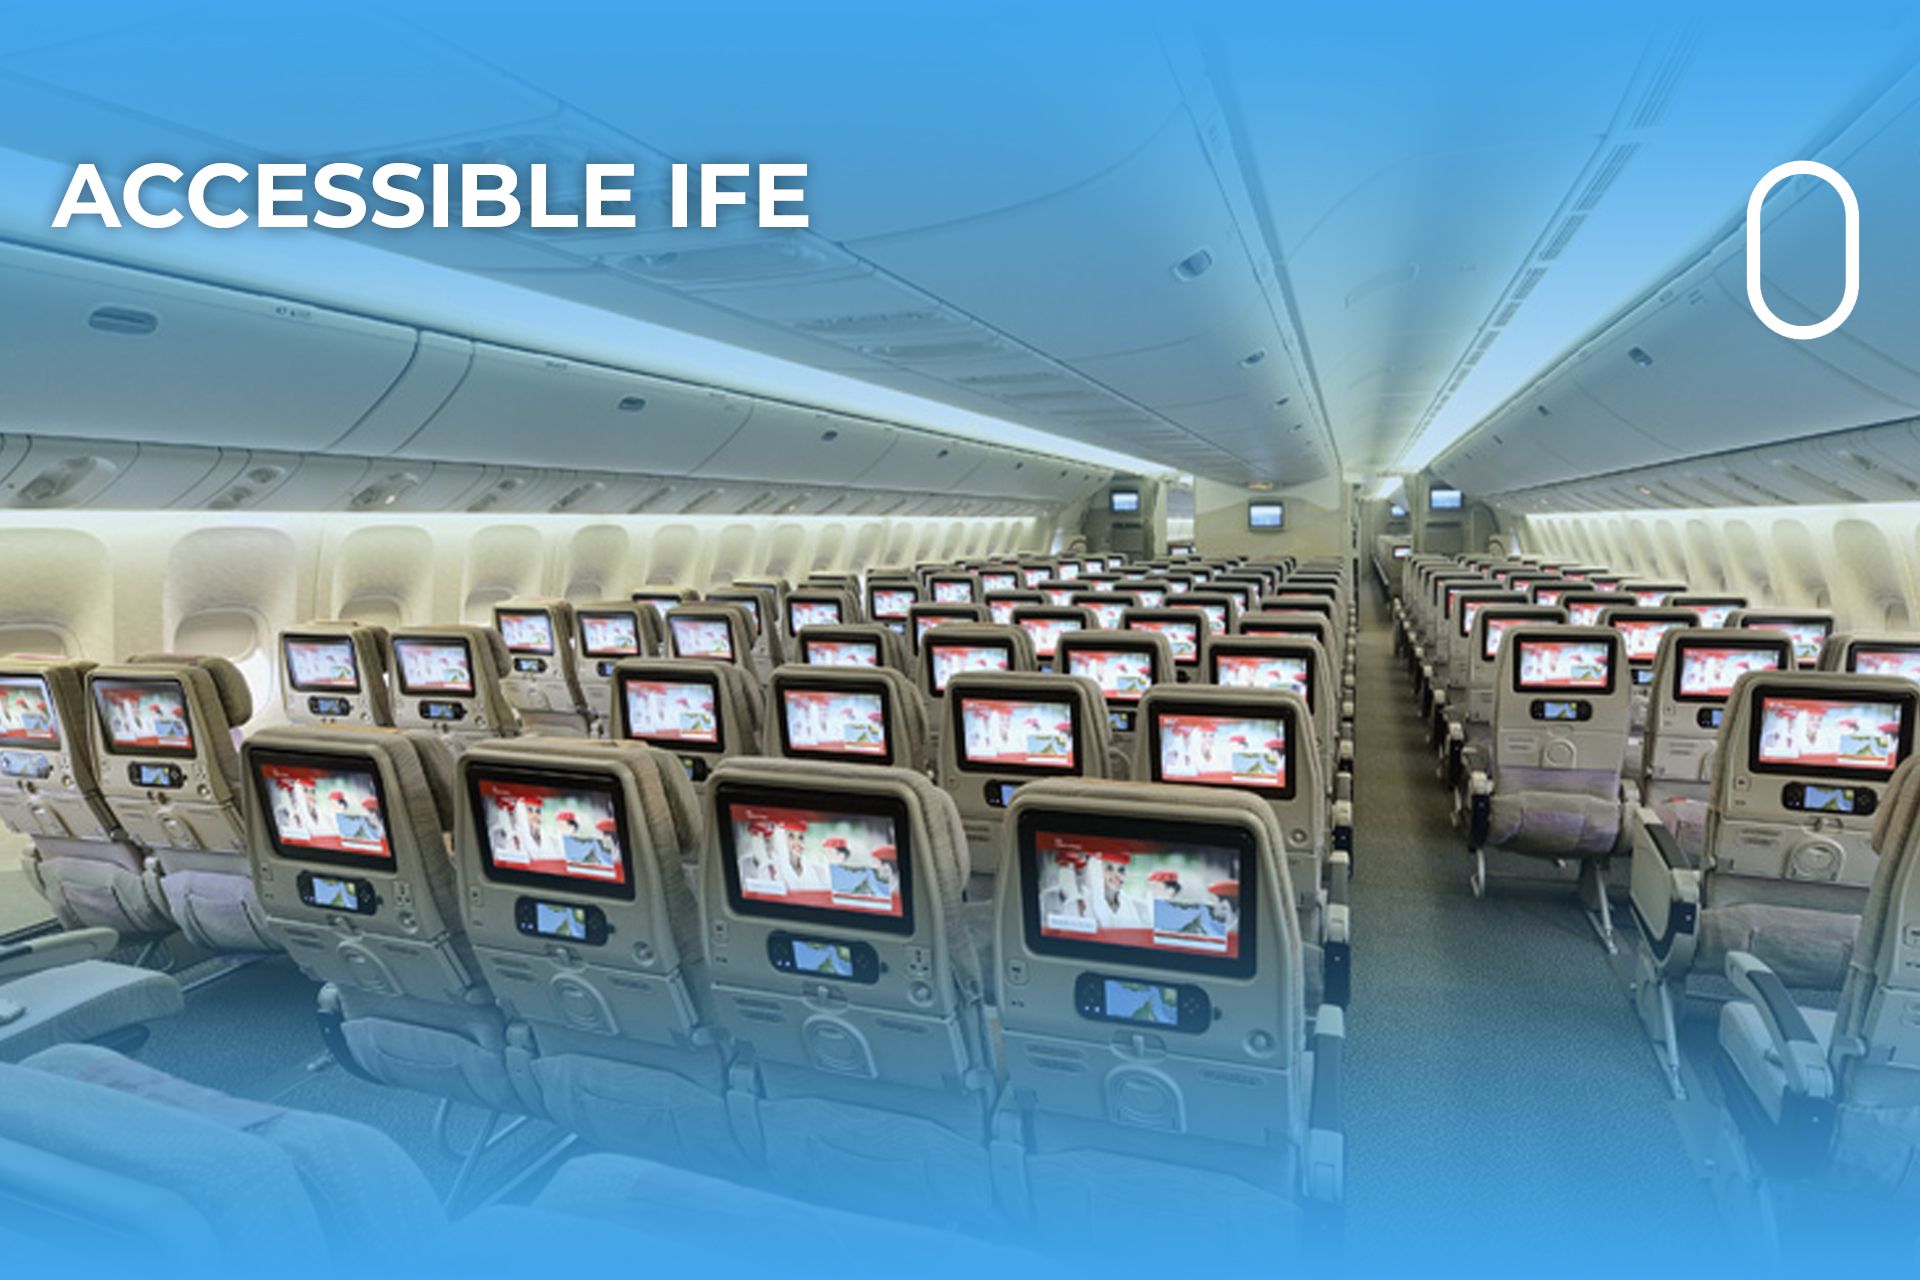 How Emirates Has Led The Way In Making Inflight Entertainment More Accessible